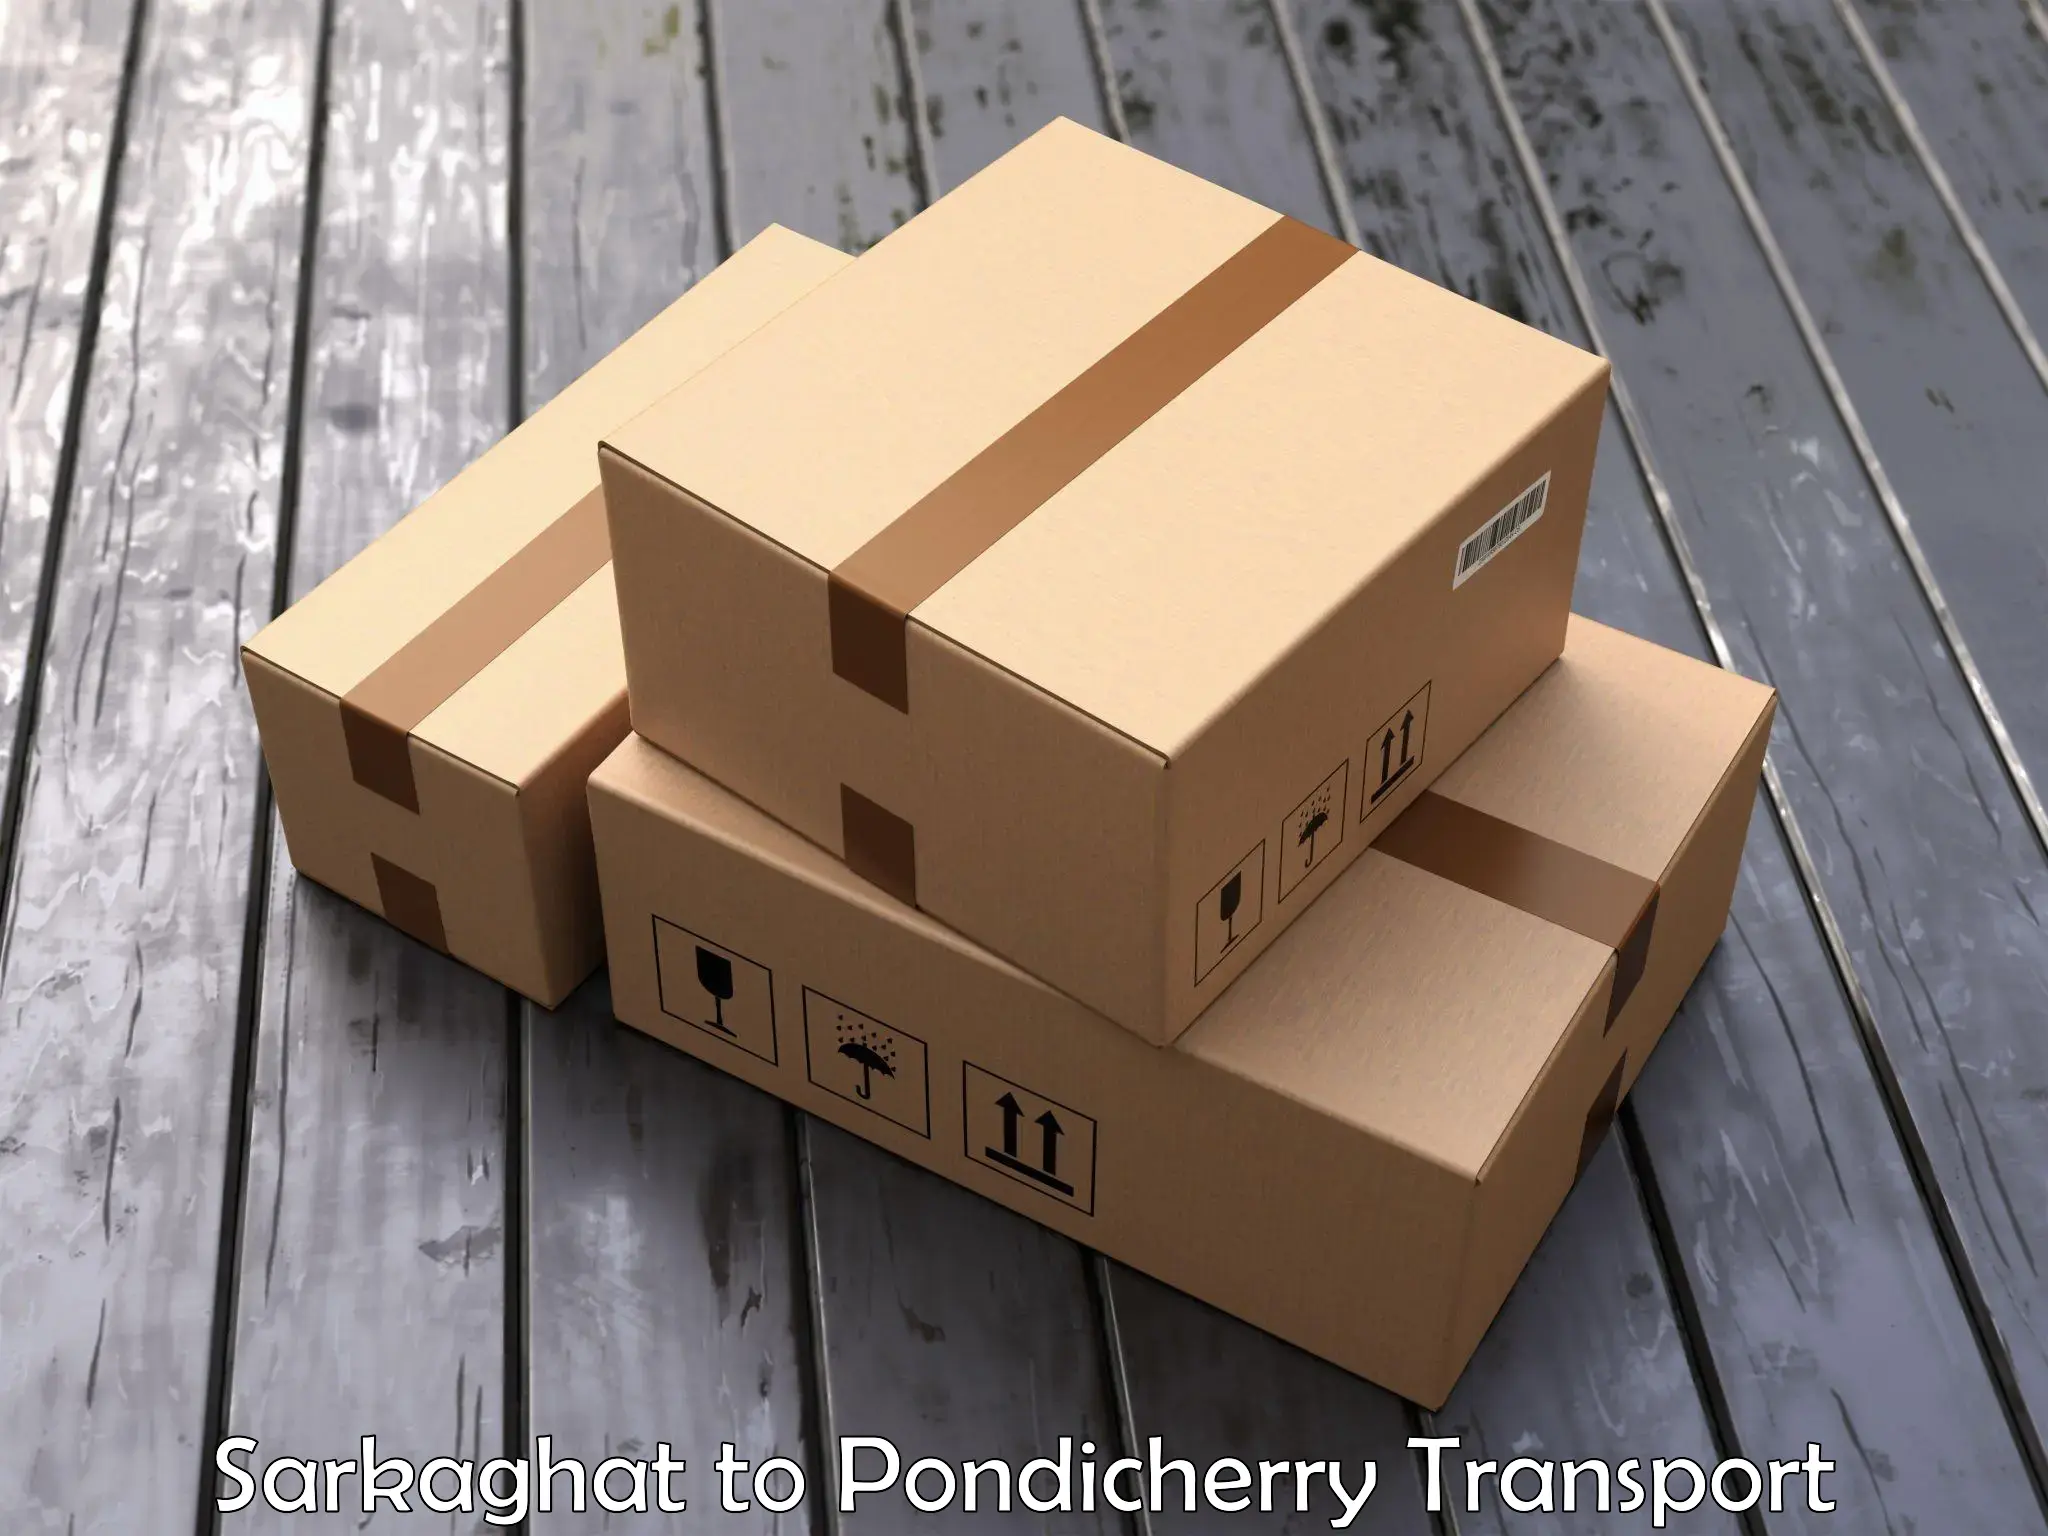 Luggage transport services Sarkaghat to Pondicherry University